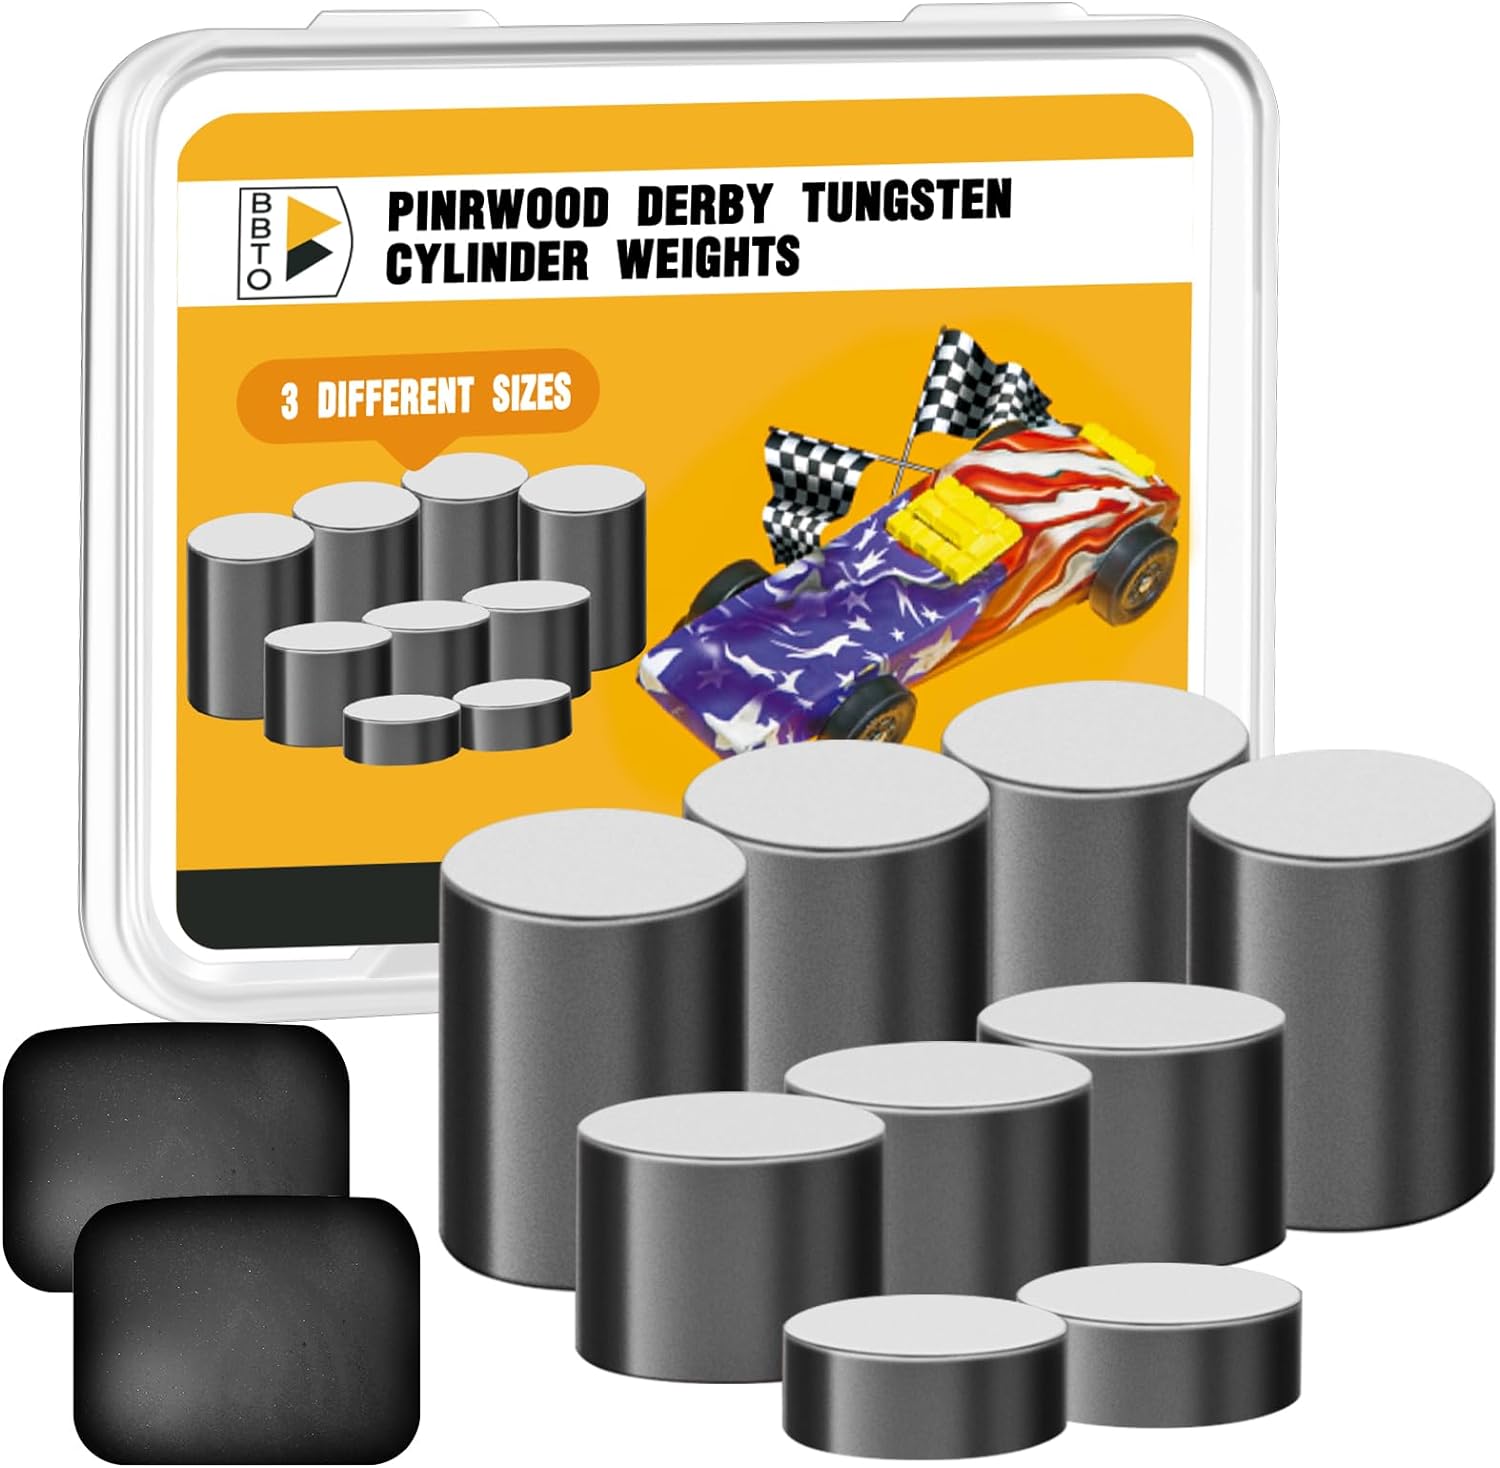 BBTO 4 oz Tungsten Weights Cylinders Weights and Tungsten Putty, Tungsten Weight Kit Compatible with Pinewood Derby Car Weights